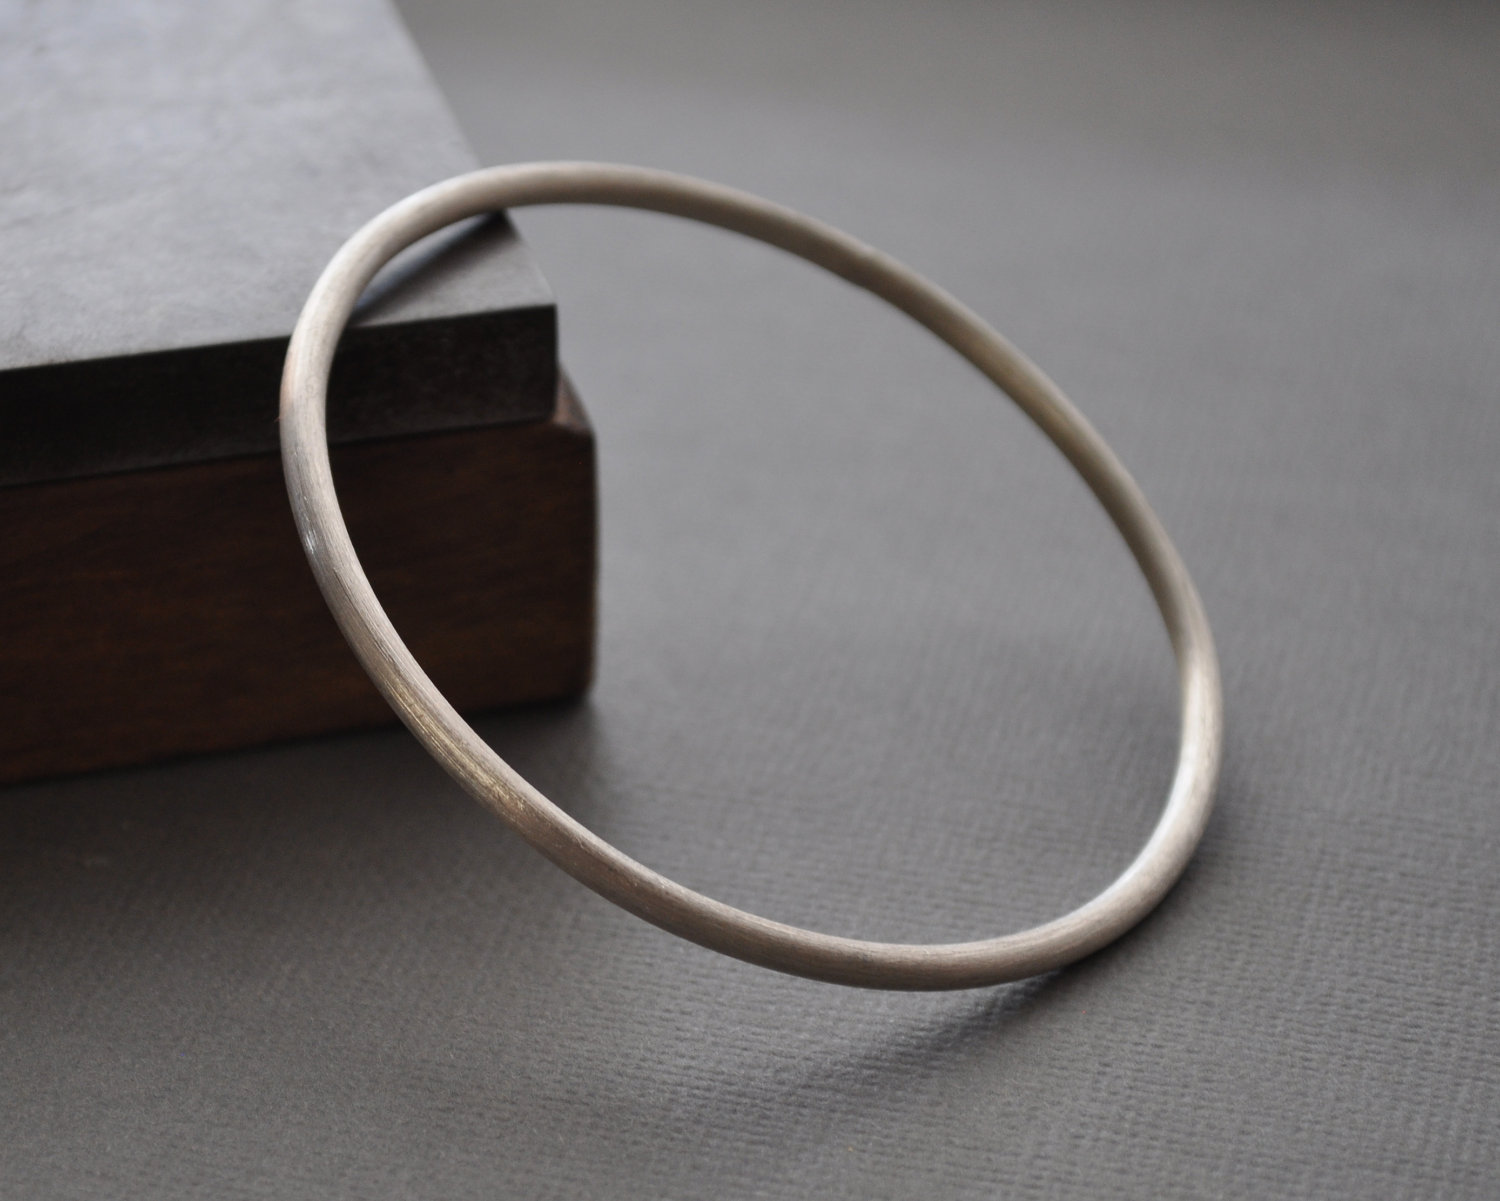 August 2014 Special – The Heavy Sterling Silver Bangle is $30 off!